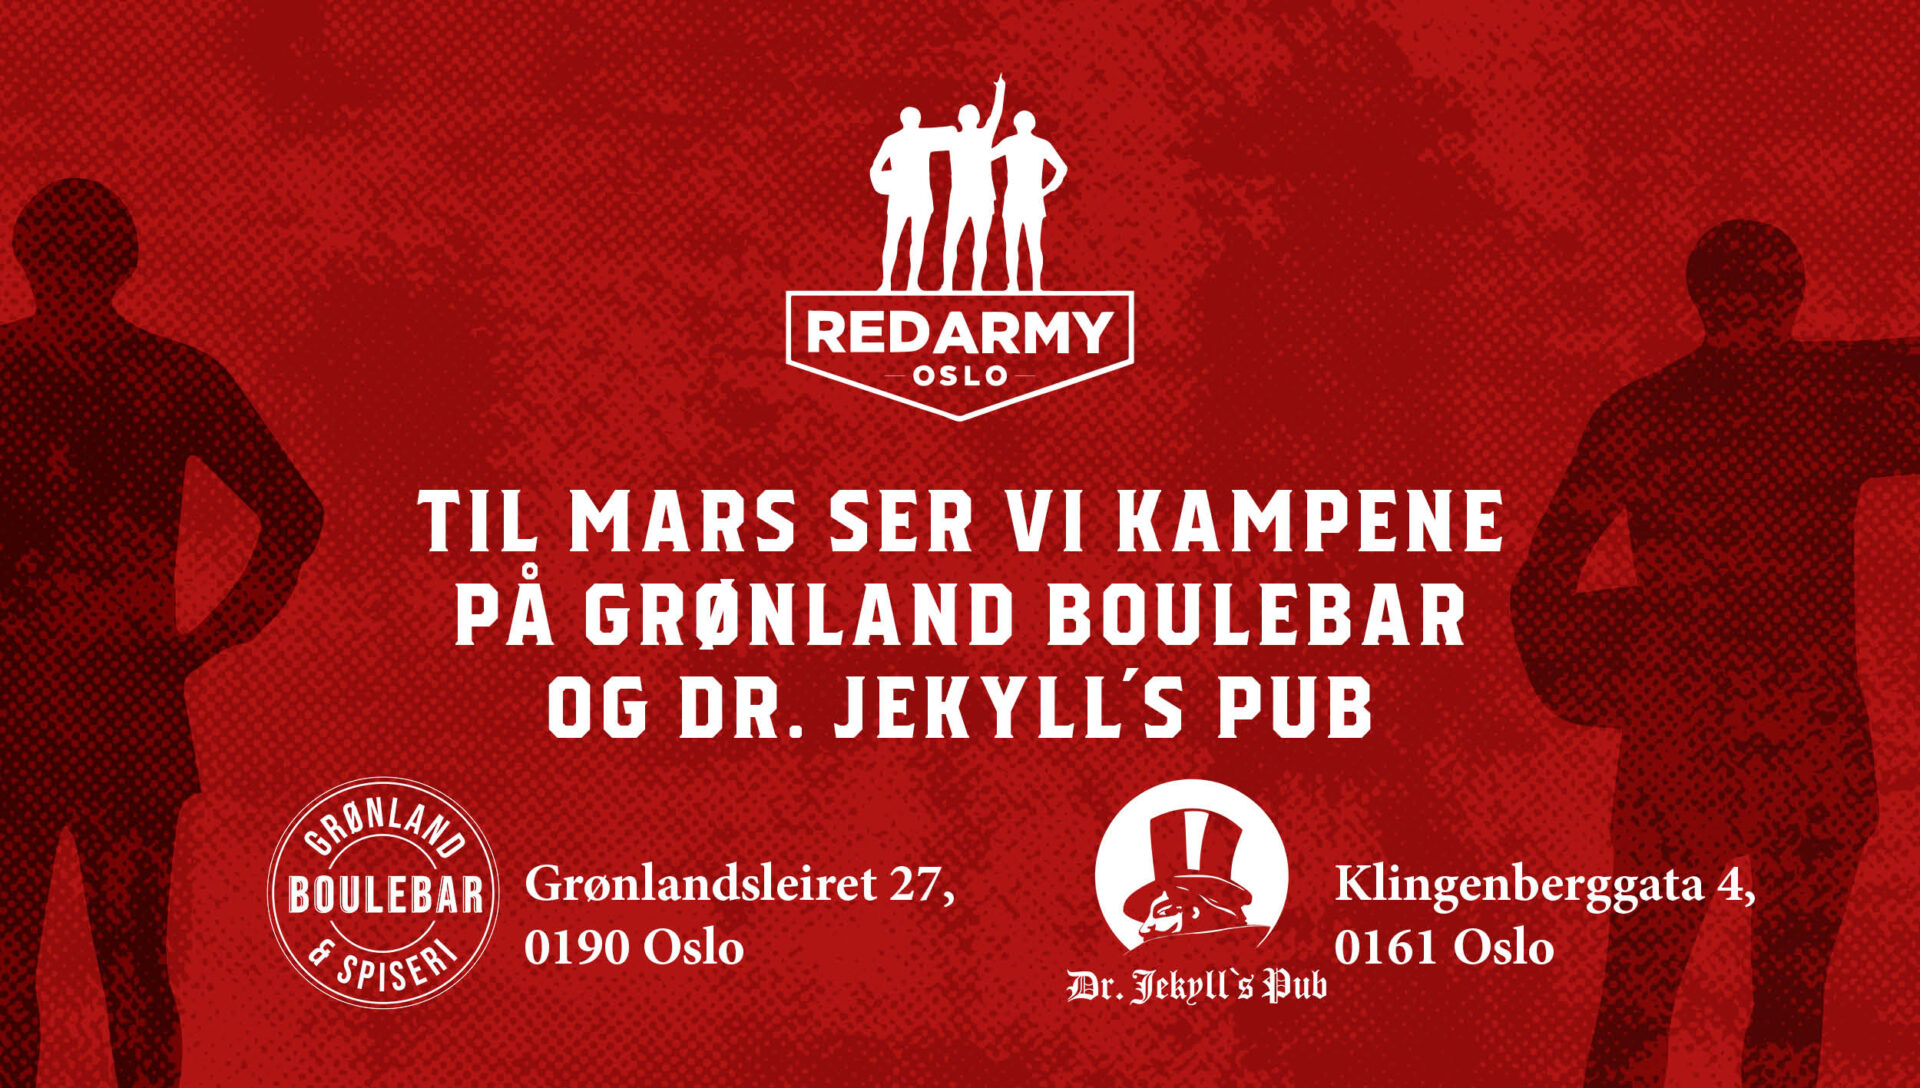 Red army Oslo